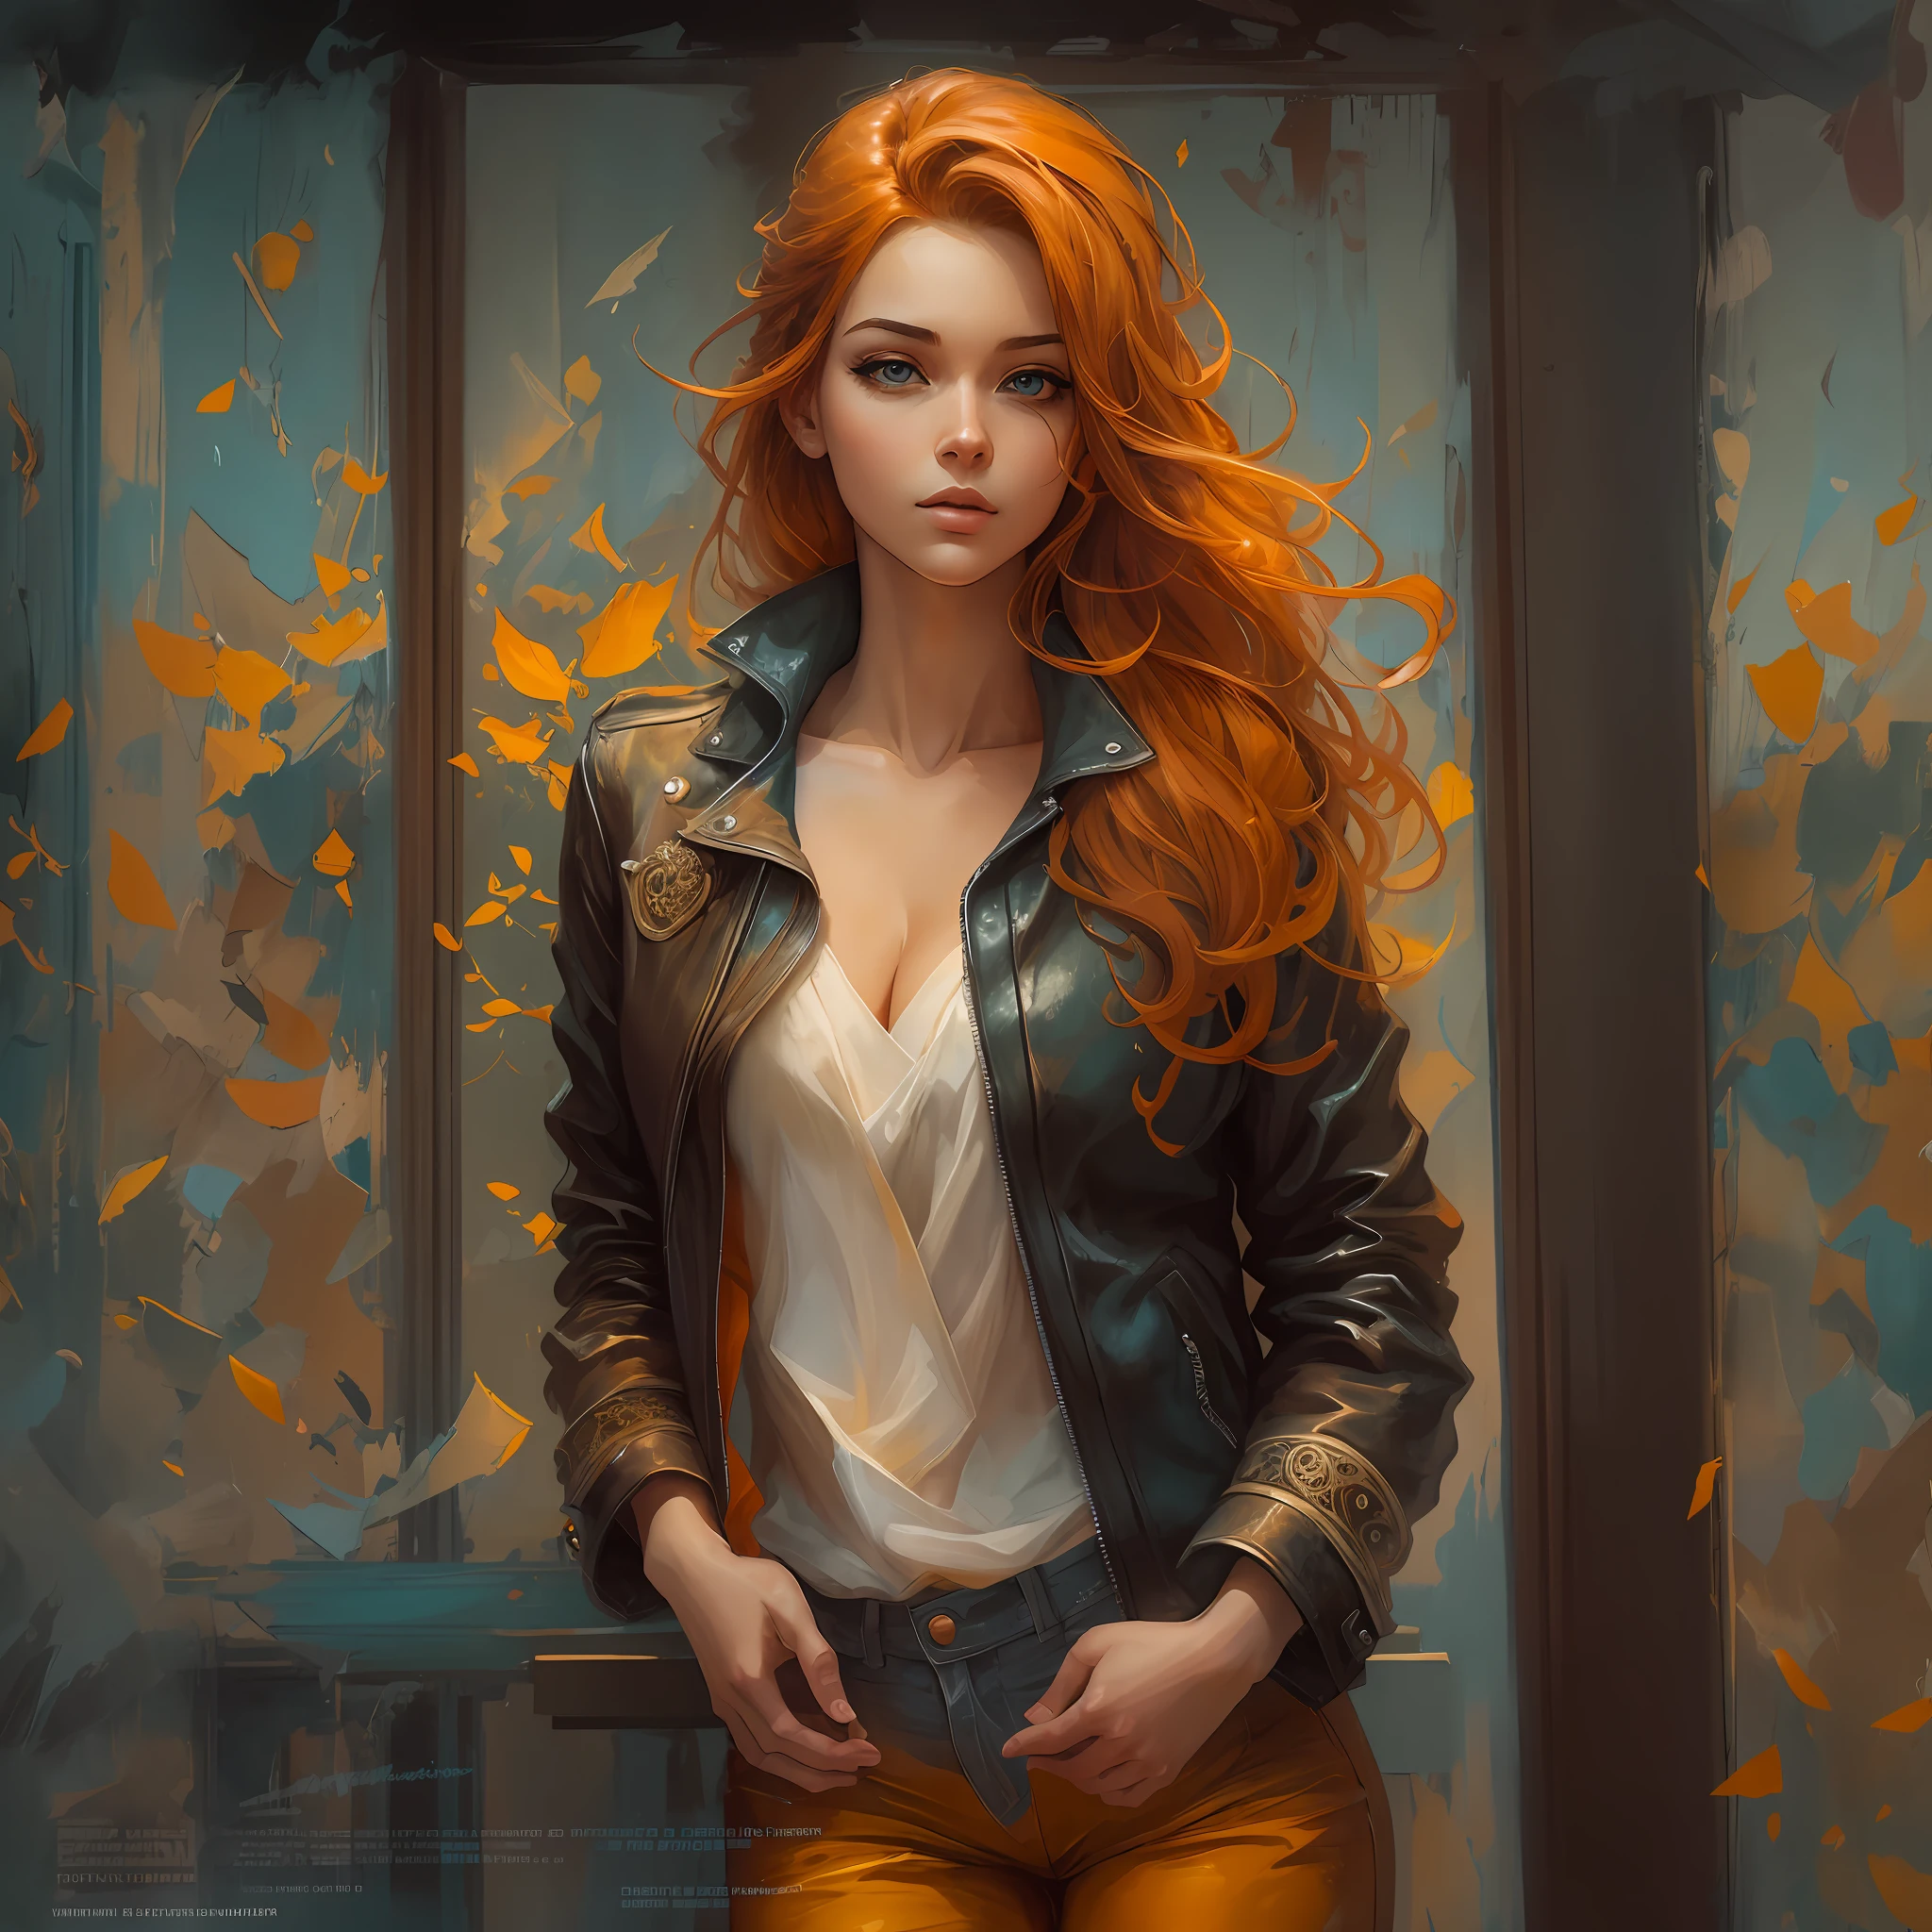 rendering, half body portrait of a young woman, 20 year. beautiful realistic eyes; fantastic face, caucasiana, beautifull look, leather jacket, orange hair, orange eyes, Michael Garmash, Daniel F Gerhartz, Storybook style, warm dreamy lighting, White background, Volumetric lighting, pulp adventure style, fluid acrylic, dynamic gradients, vivid color, illustration, vector curves highly detailed, Simpler, smooth ass e limpo, vectorial art, smooth ass, Johan Grenier, character  design, 3d shadowing, cinemactic, ornate patterns, elegant organic framing, hyper- realism, posterized, collection of masterpieces, vivid colors exuberant, Twilight, wet gouache